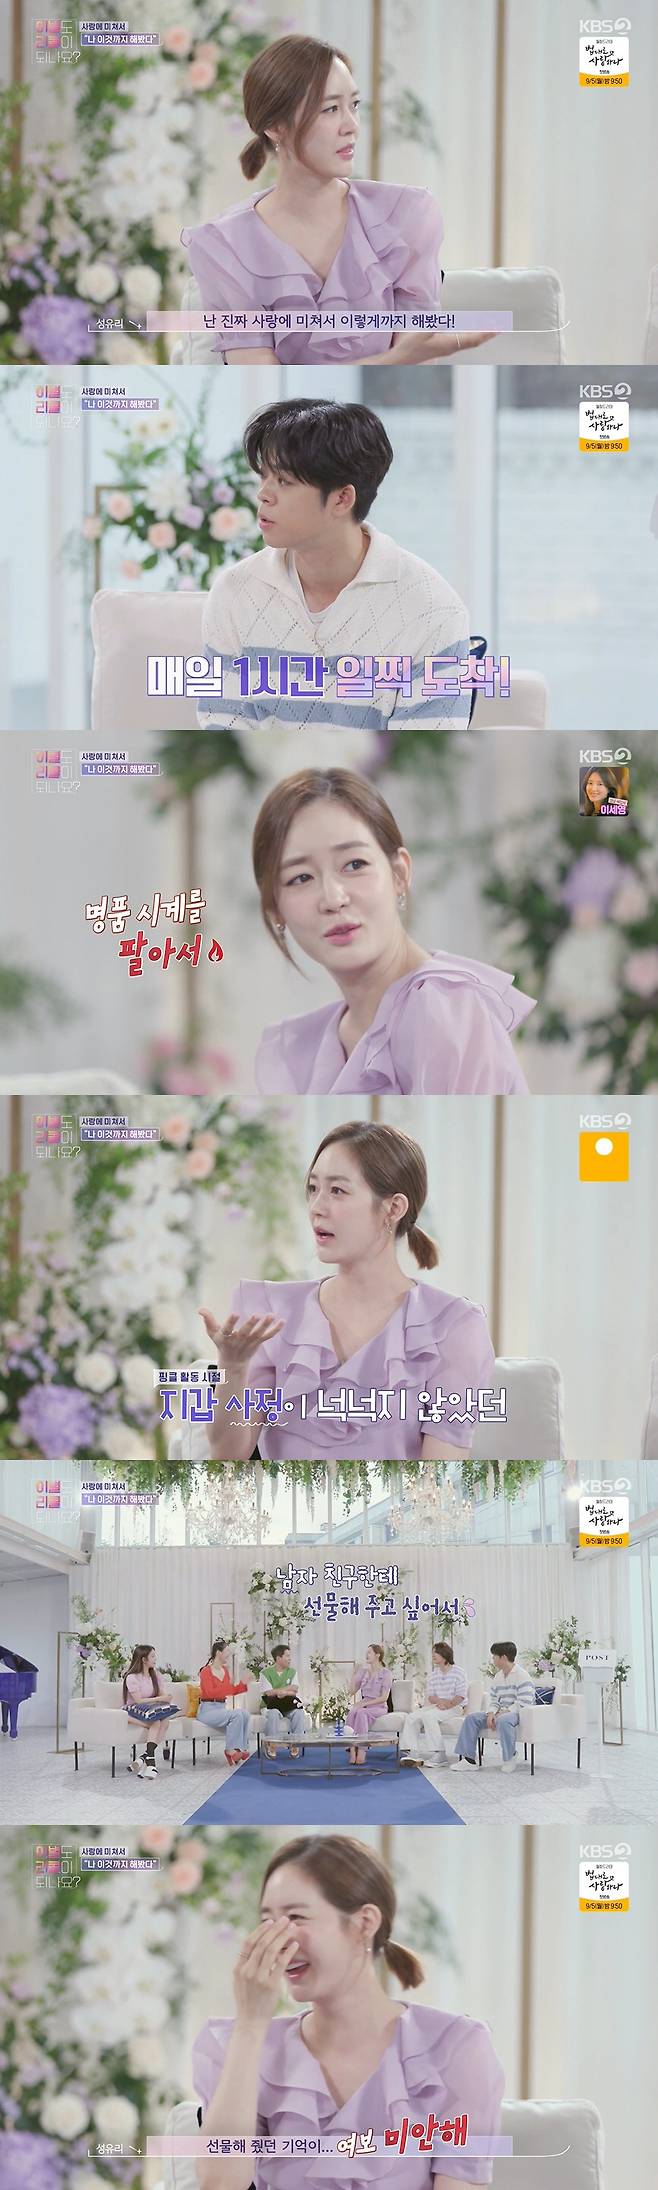 Sung Yu-ri has been honest about his past love experience.KBS Does the breakup also be recalled? on the 22nd?In , the story of Crédit Agricole, who breaks up with First Love, was drawn.On the day, Sung Yu-ri asked Crédit Agricole planners, What Memory does First Love remain?I have a love that I have done so far, but I do not want to do my first love yet?Yang Se-hyeong said, There are many people who do not know what First Love is like that. The standard of First Love I think is that it is First Love that I can not sleep while thinking about someone and keep thinking about him.I have never liked anyone that much, he said. The more I do, the more I learn.Jang Youngran boasted that my husband is my first love.However, he threw a stone fastball saying, I do not think so, and soon he laughed, I have come out of my heart.Brave Girls Yu-Jeong, who starred as a daily Crédit Agricole Planner, said, My first love is a person I am curious about.When I suddenly think about it, I think I want to be good. I met him at the age of 24 when I was in high school, and I met him again and again, he said.I felt good when I heard about marriage. Someone too good to do marriage. (Love) seems to be the timing.If I had met now, I would have looked back and marriage with him. I was too young at that time. Meanwhile, the Crédit Agricole Planners listened to Xs love story, which was devoted to Crédit Agricole, and told their own love experiences.I had a person who met for about two years, but when I met him, I always went an hour earlier than the appointment time. I wanted to see him soon.Sung Yu-ri said: Ive sold luxury watches.I want to give my boyfriend something Gift (when I was in Fin.K.L activity), but my mother took my income, so I did not have any money. So I wanted to give my boyfriend something Gift, so I got a memory that I sold my luxury watch at a low price and gave it to him.He said, Im sorry, honey. He laughed at the apology.On the other hand, Son Dong-woon said, I honestly started Idol Producer too early, I started Idol Producer in junior high school and I could not come all in like this.Yang Se-hyeong pointed out that the dragonworm is getting away again, and he said, I have been active since I was 8 years old.How long did you have time in junior high school? 